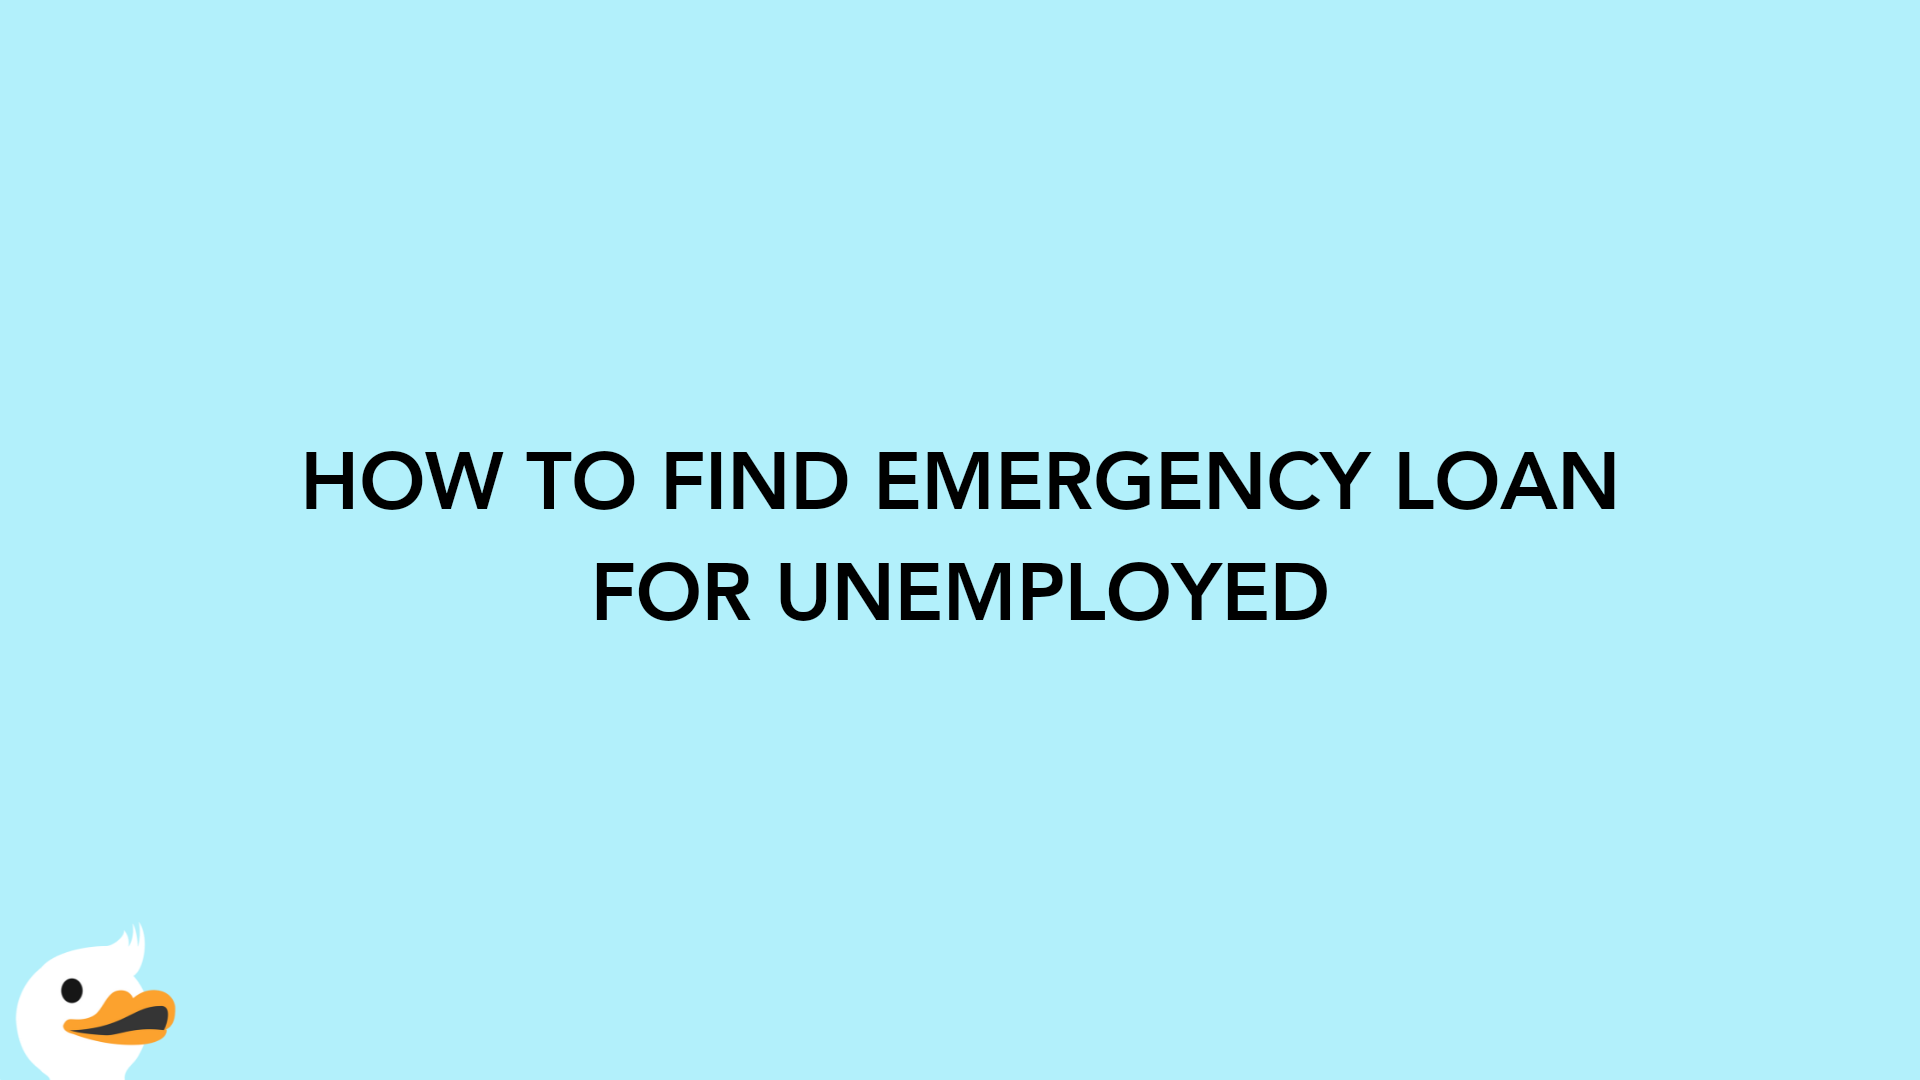 HOW TO FIND EMERGENCY LOAN FOR UNEMPLOYED